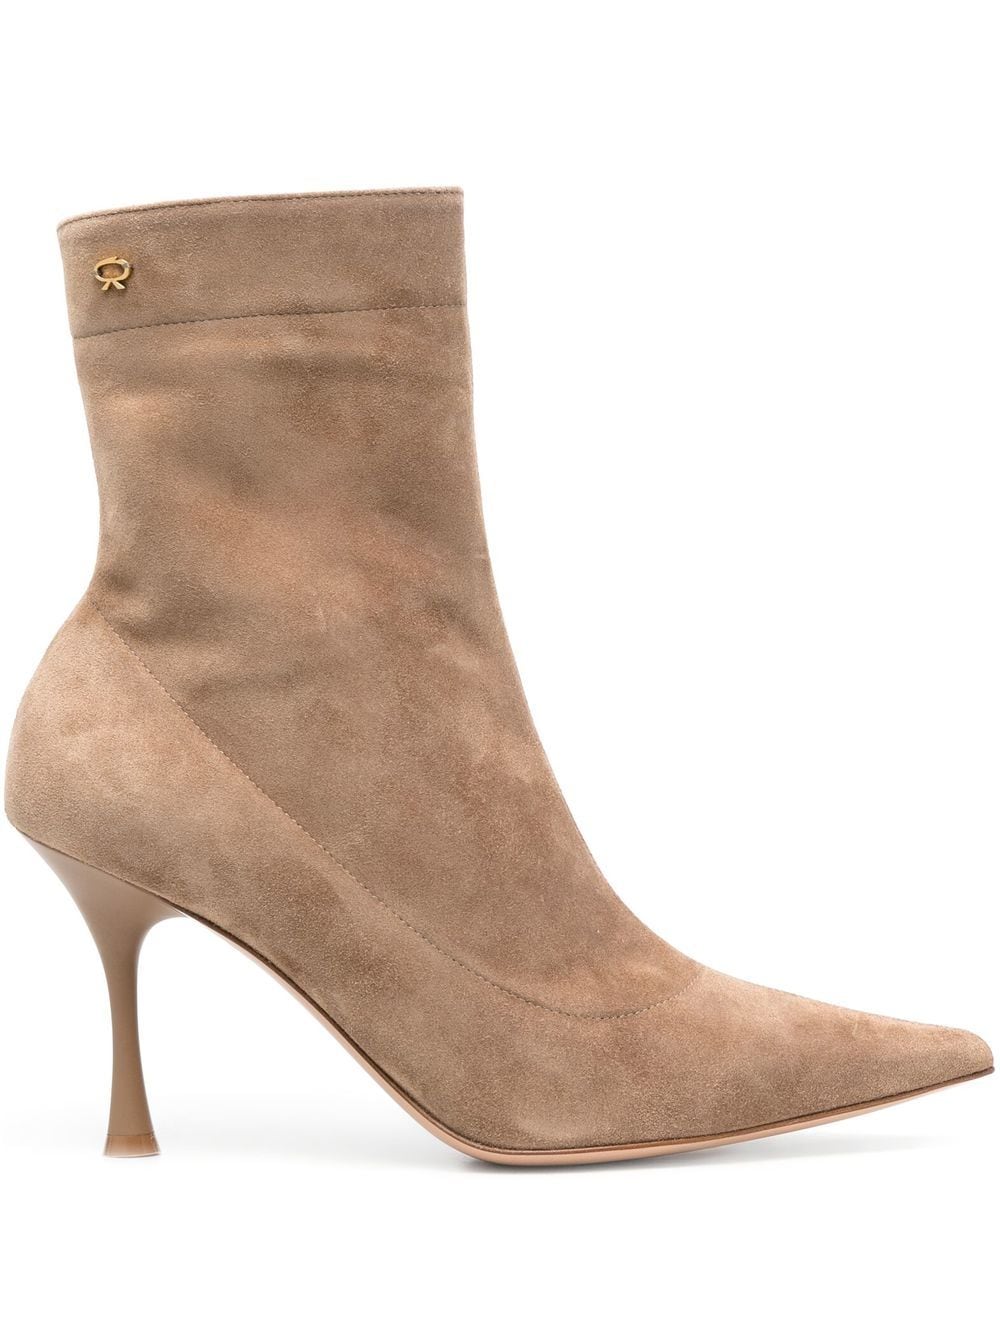 Gianvito Rossi Dunn 85mm suede ankle boots - Brown von Gianvito Rossi